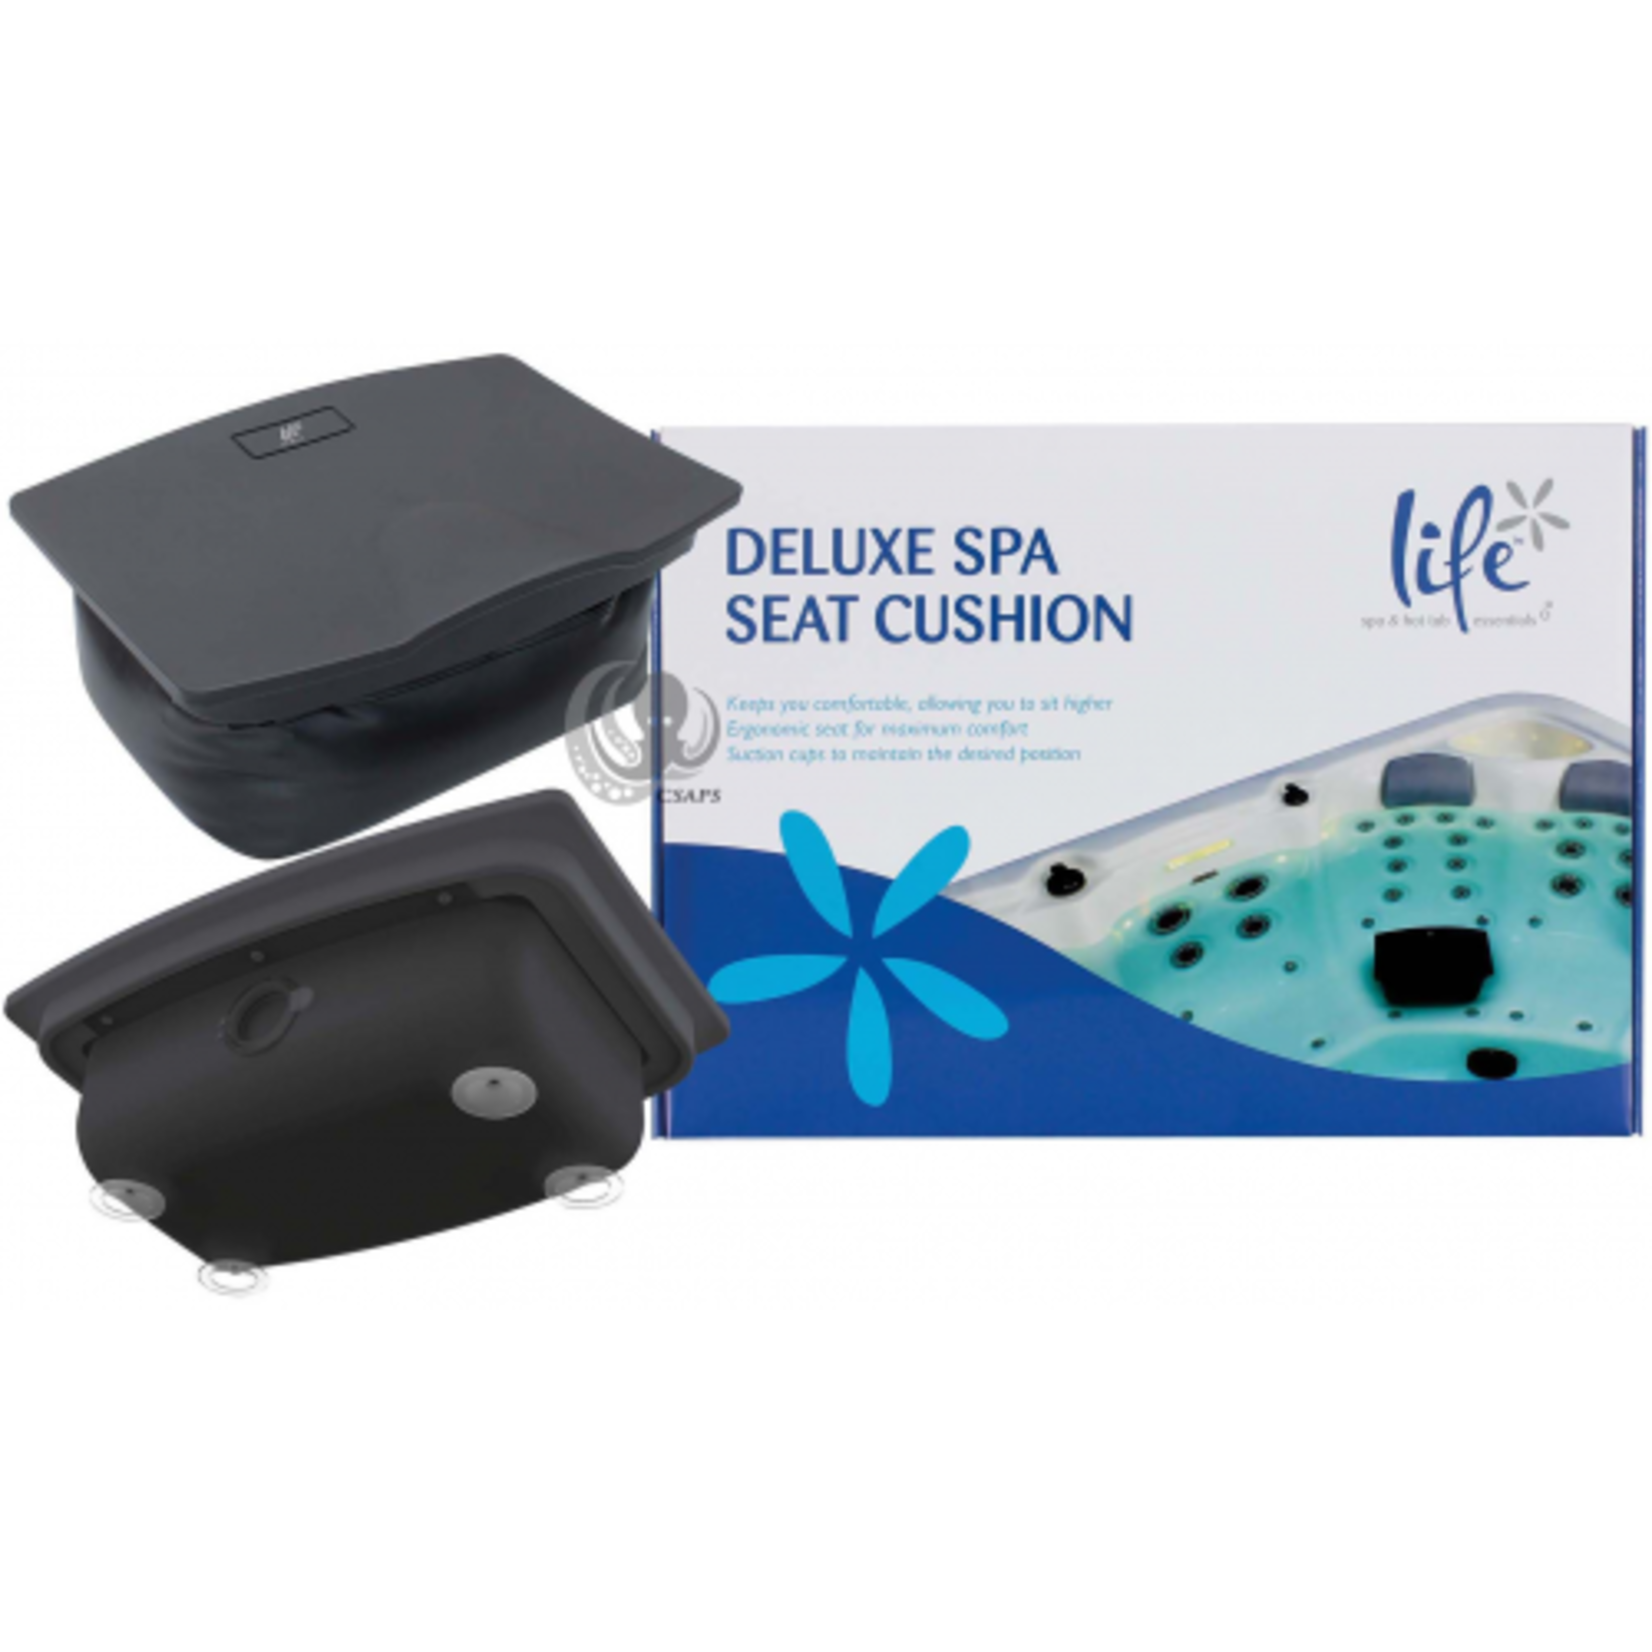 LIFE DELUXE SPA SEAT CUSHION